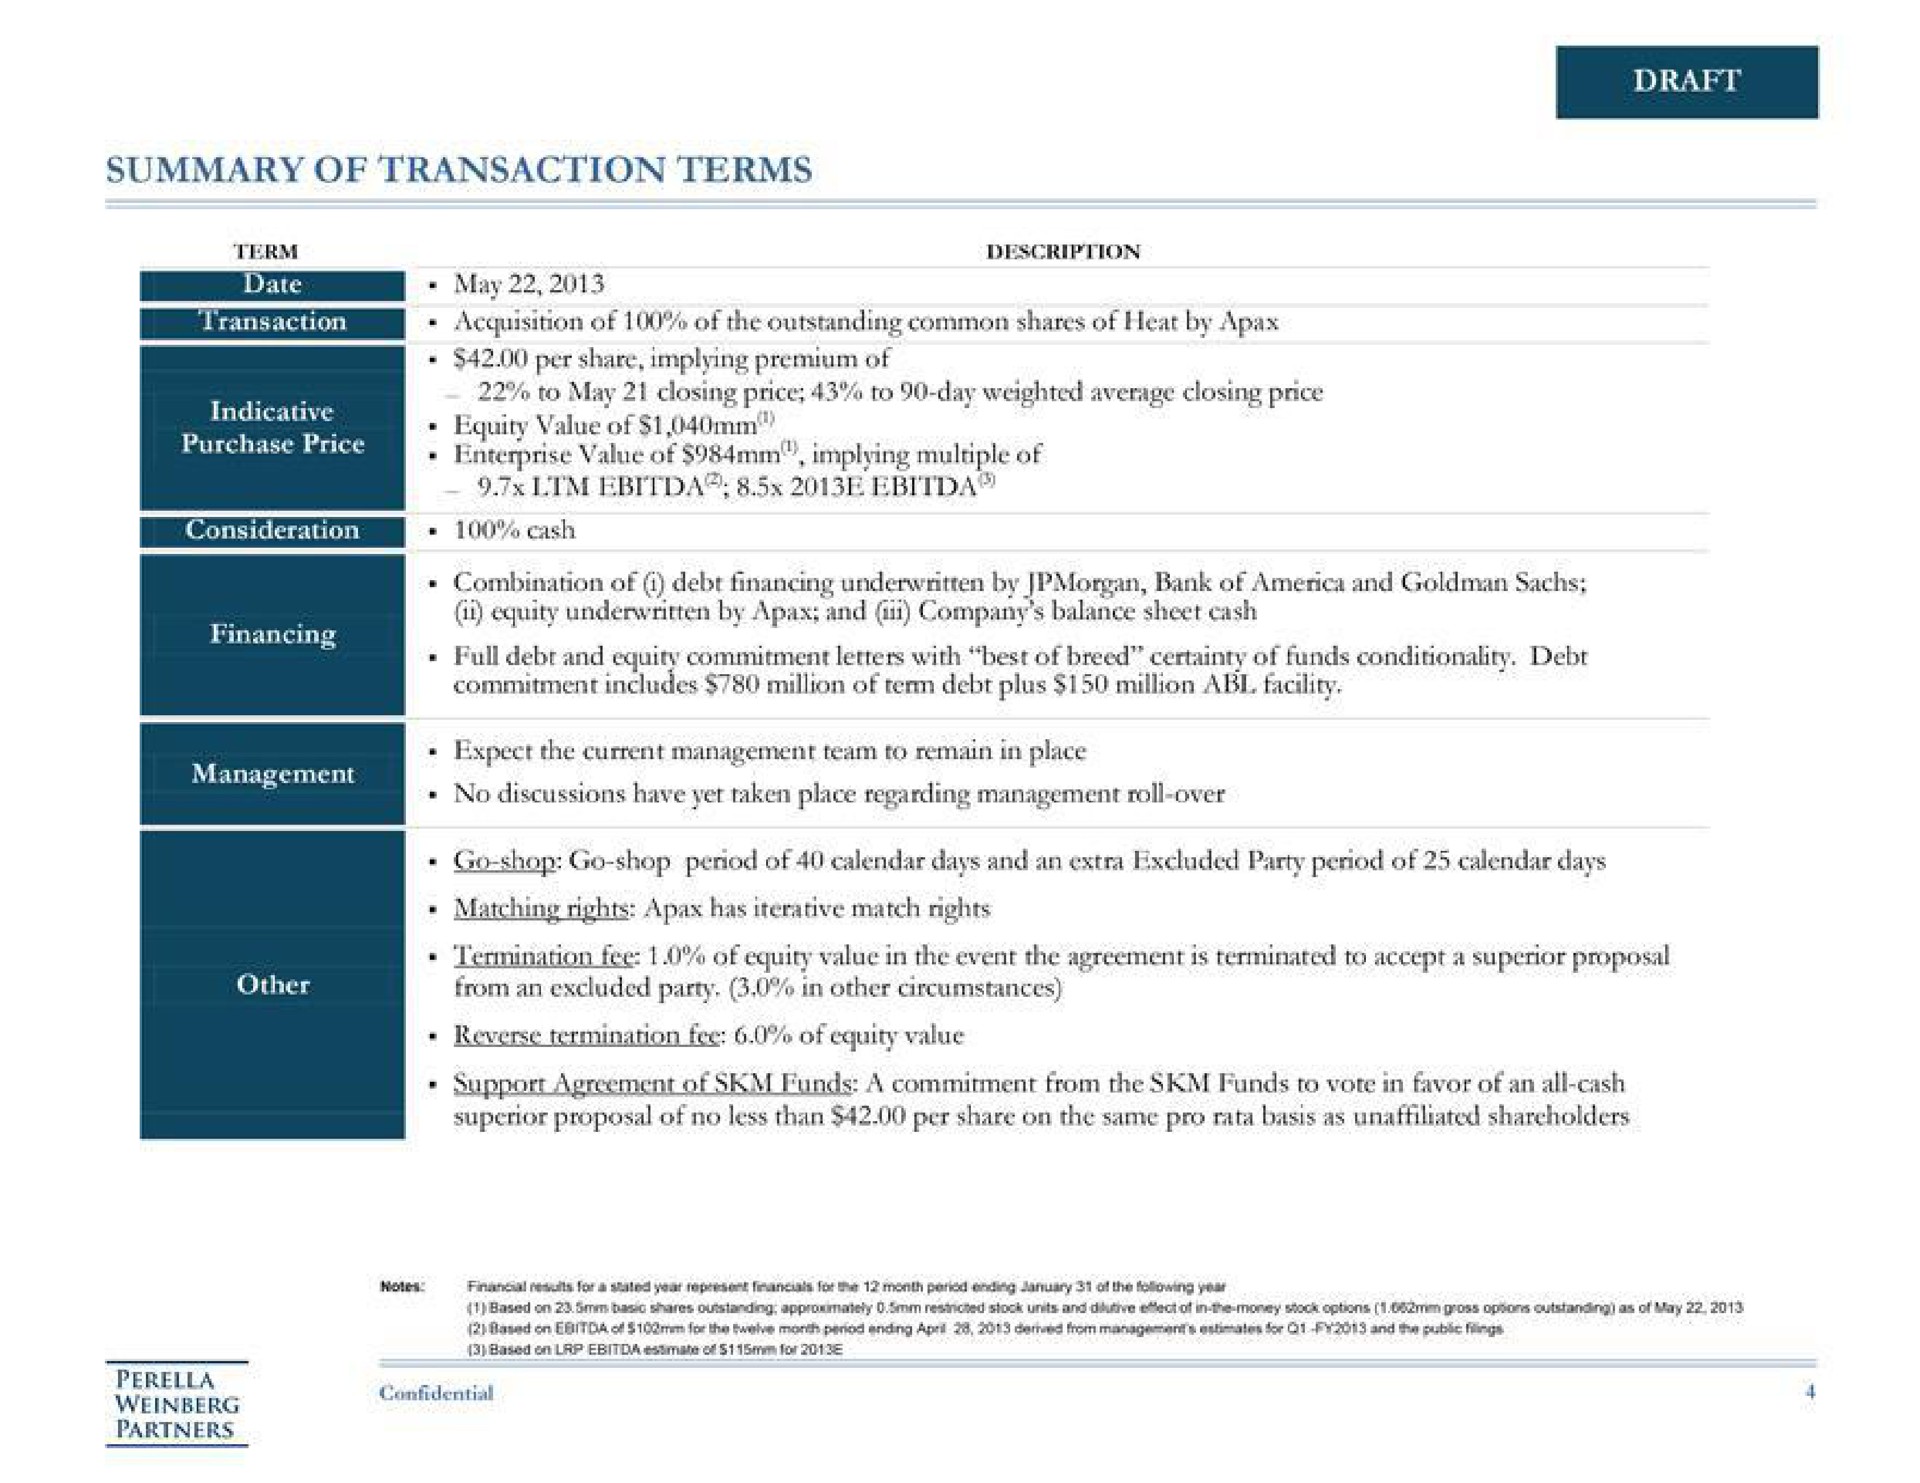 draft summary of transaction terms to may closing price to day weighted average closing price equity value of other from an excluded party other circumstances superior proposal of no less than per share on the same pro rata basis as unaffiliated shareholders | Perella Weinberg Partners